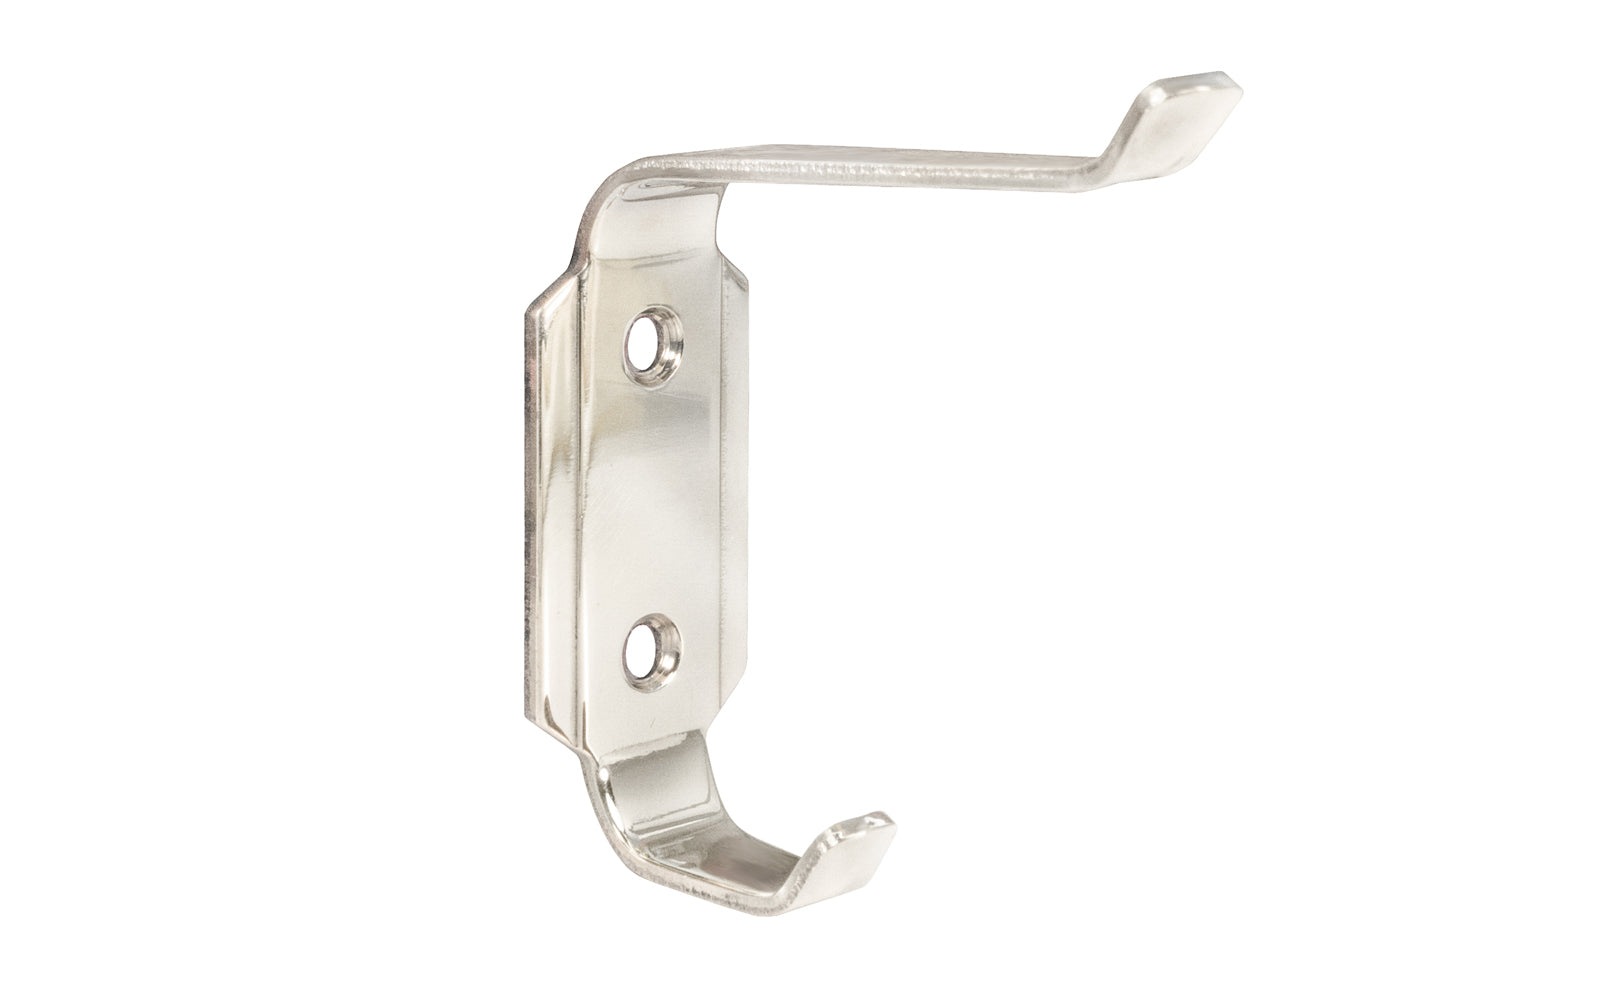 A retro looking & attractive Art-Deco style polished nickel finish hook. Made of quality solid brass material, this double hook is great for use in hallways, kitchens, bathrooms, hall trees, bedrooms, & many other places. Designed in the 1930's, Streamline, Machine Age, Art Deco style of hardware. 2-3/8